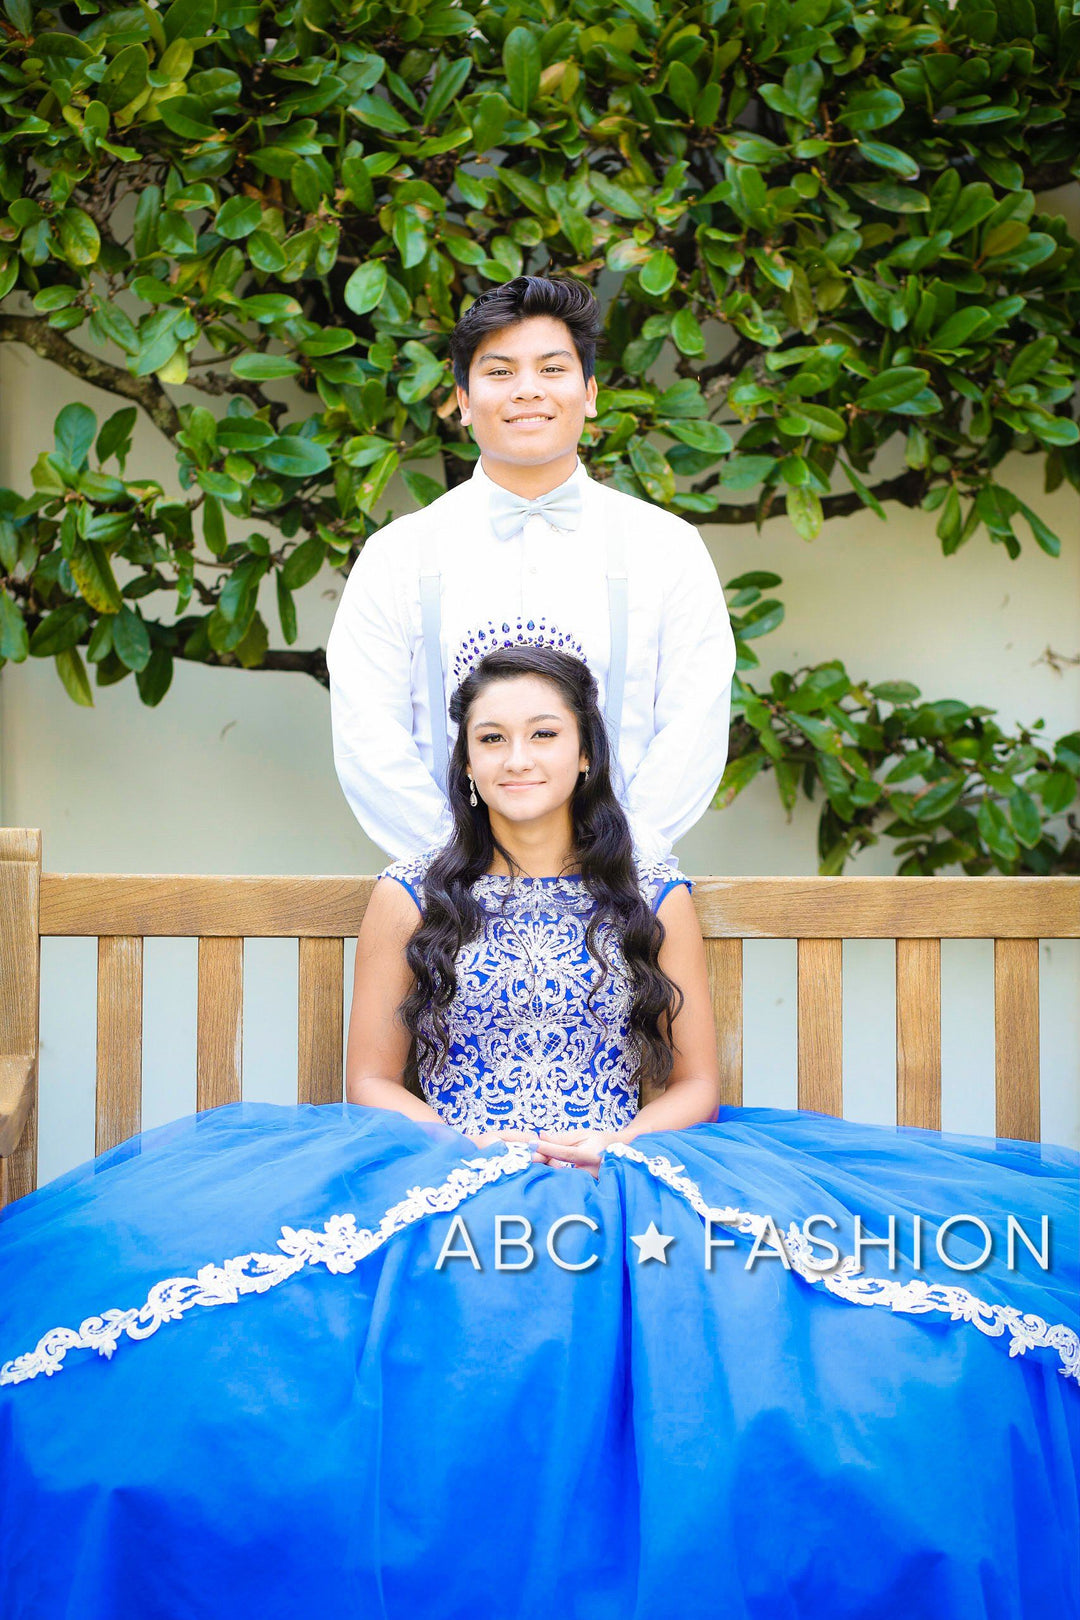 Lace Appliqued Quinceanera Dress by Fiesta Gowns 56336-Quinceanera Dresses-ABC Fashion